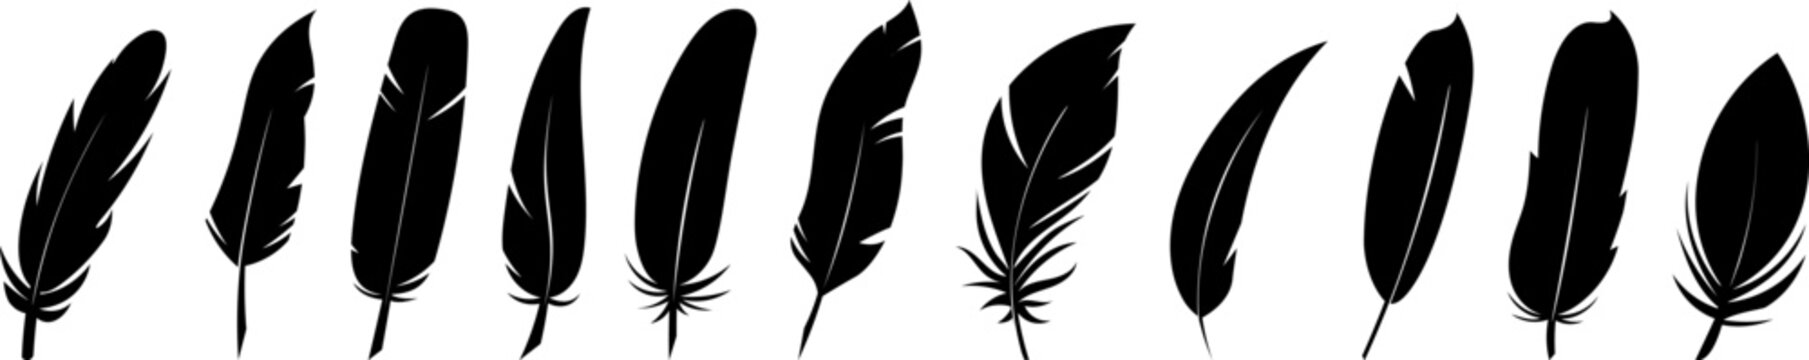 Set of Bird Feather. Feathers vector set in a flat style. Pen icon. Black quill feather silhouette. Plumelet collection isolated on white background